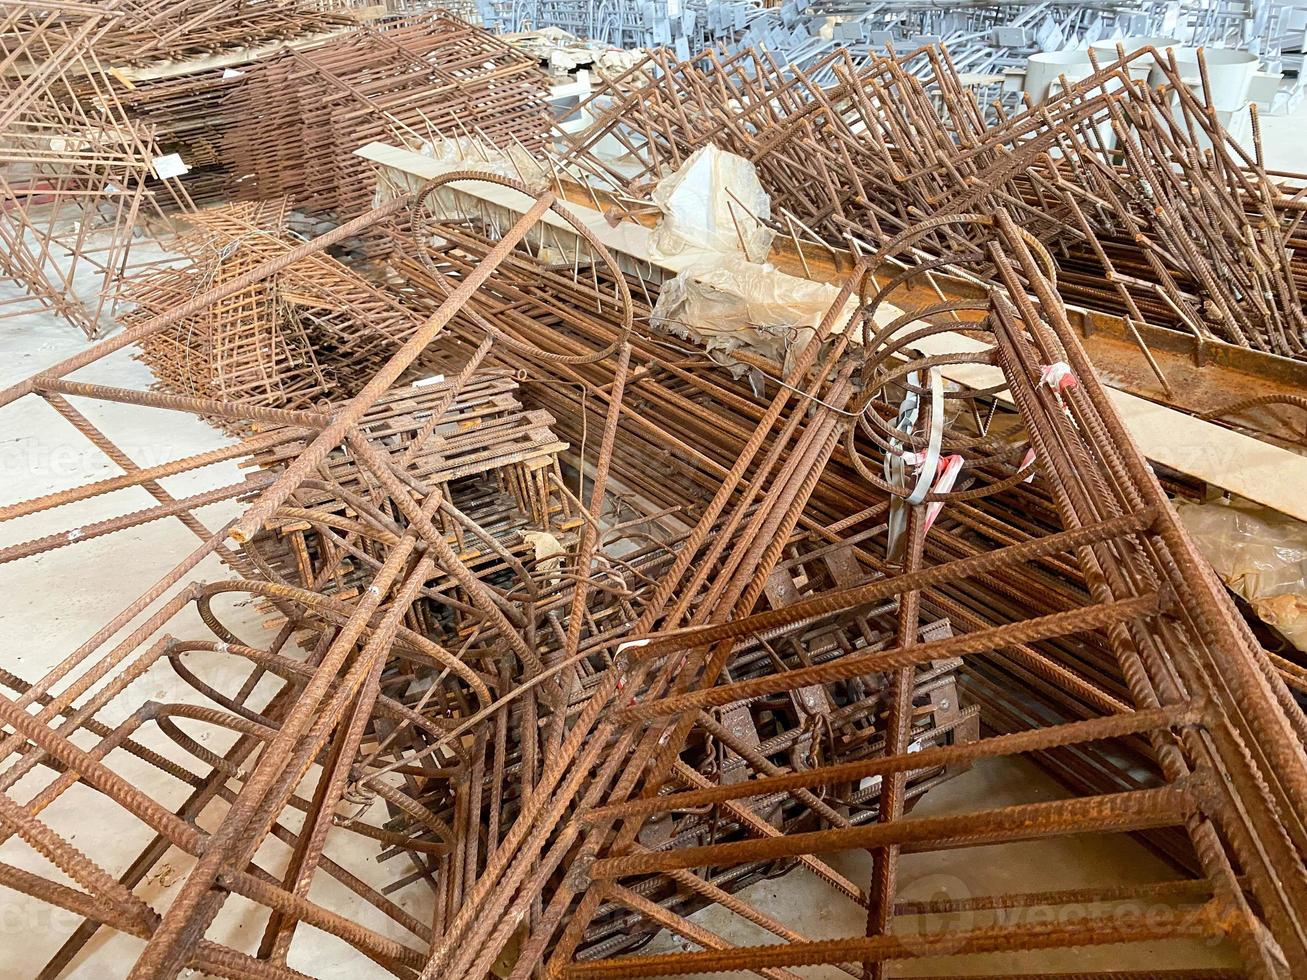 Iron rusty bars of wire reinforcement for building houses and producing industrial reinforced concrete at a construction site photo